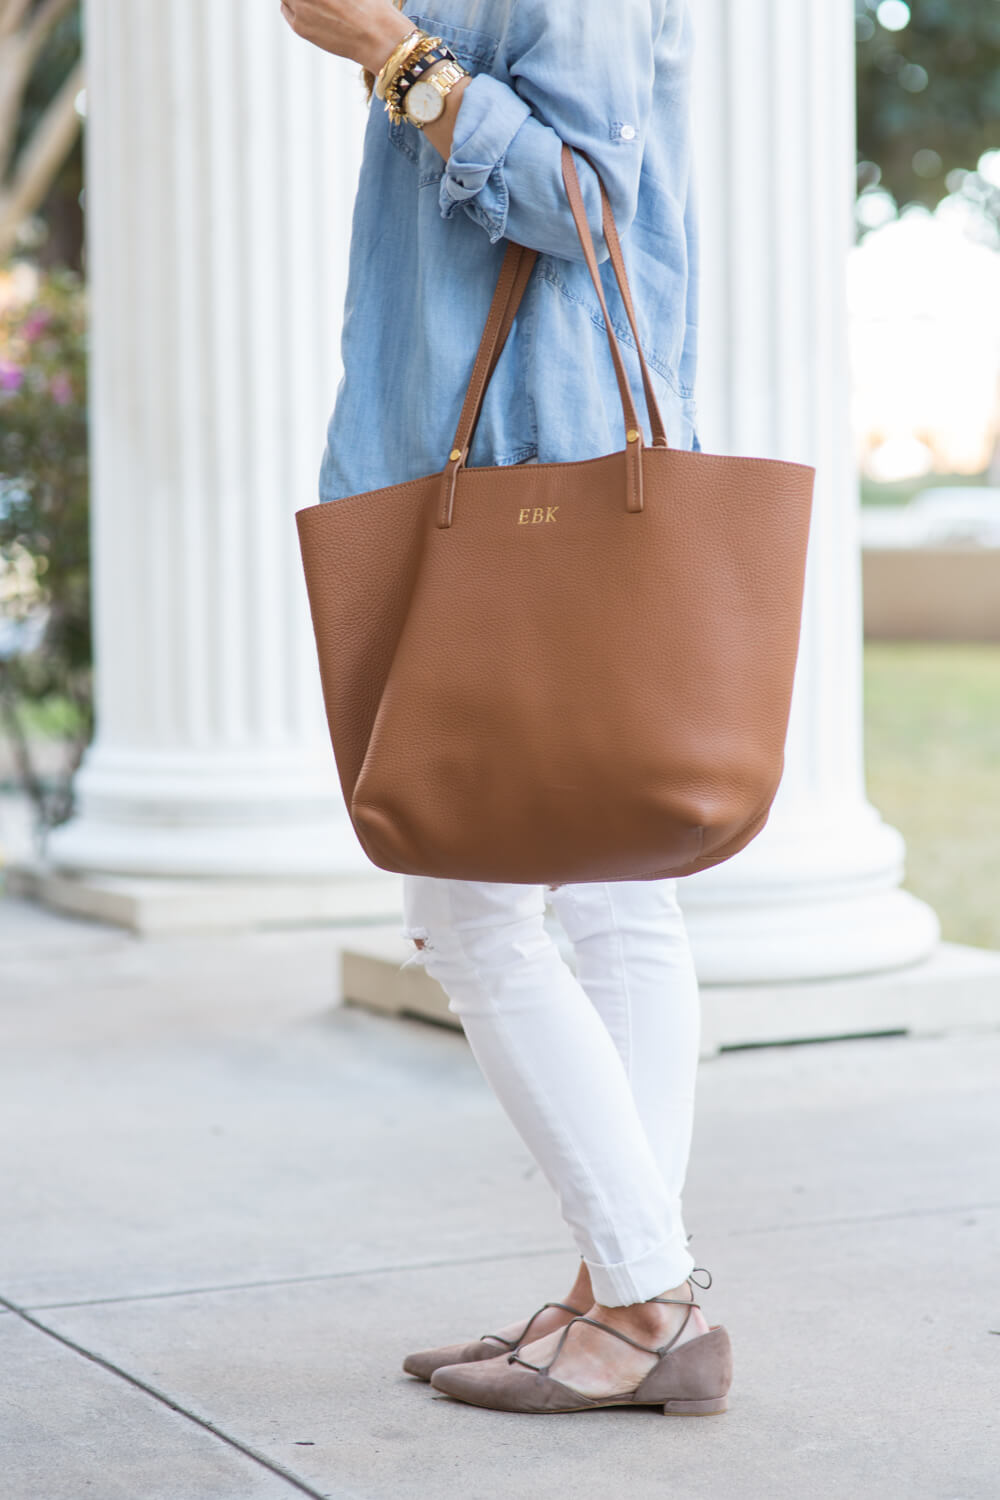 brighton the day wearing white jeans, stuart weitzman taupe suede flats, gigi ny cognac leather everyday tote